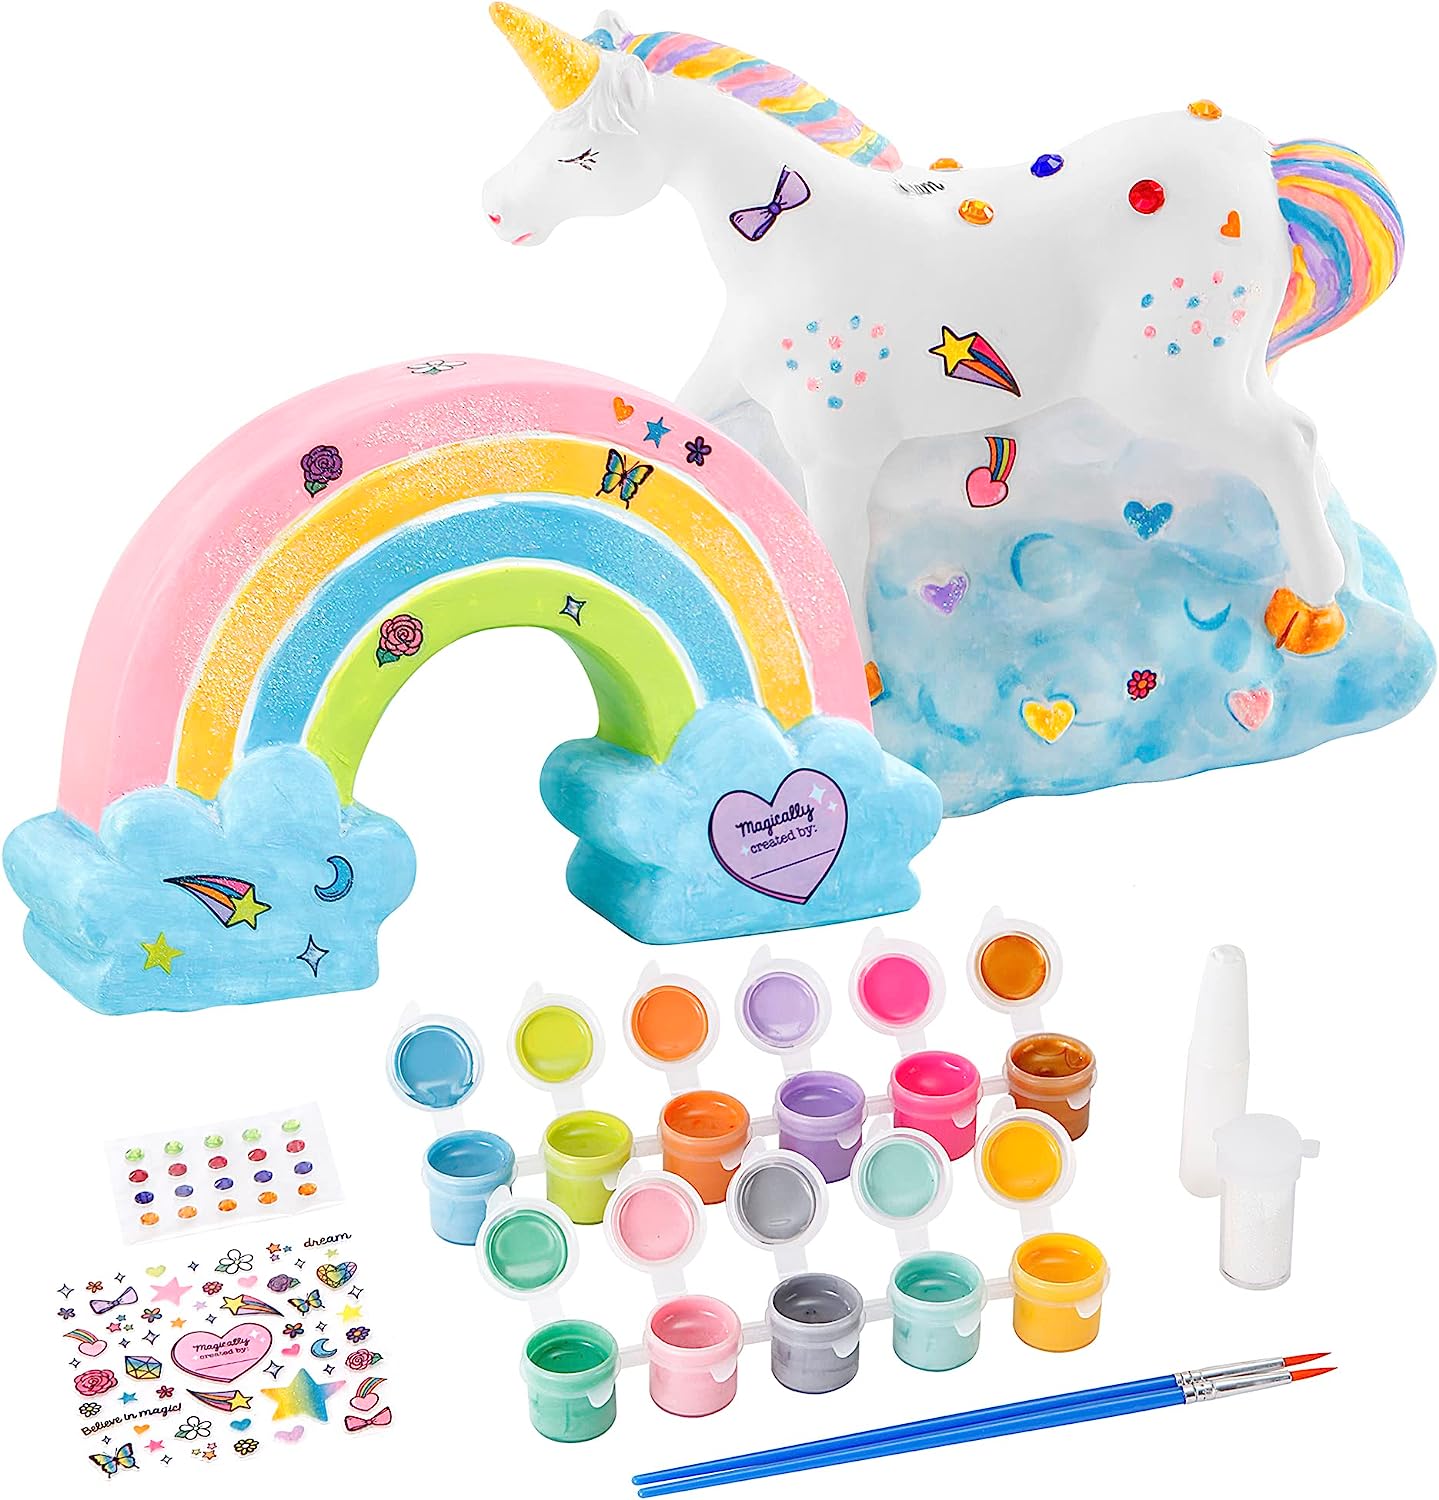 Unicorn Crafts Painting Kit for Girls and Kids Aged 5 [...]